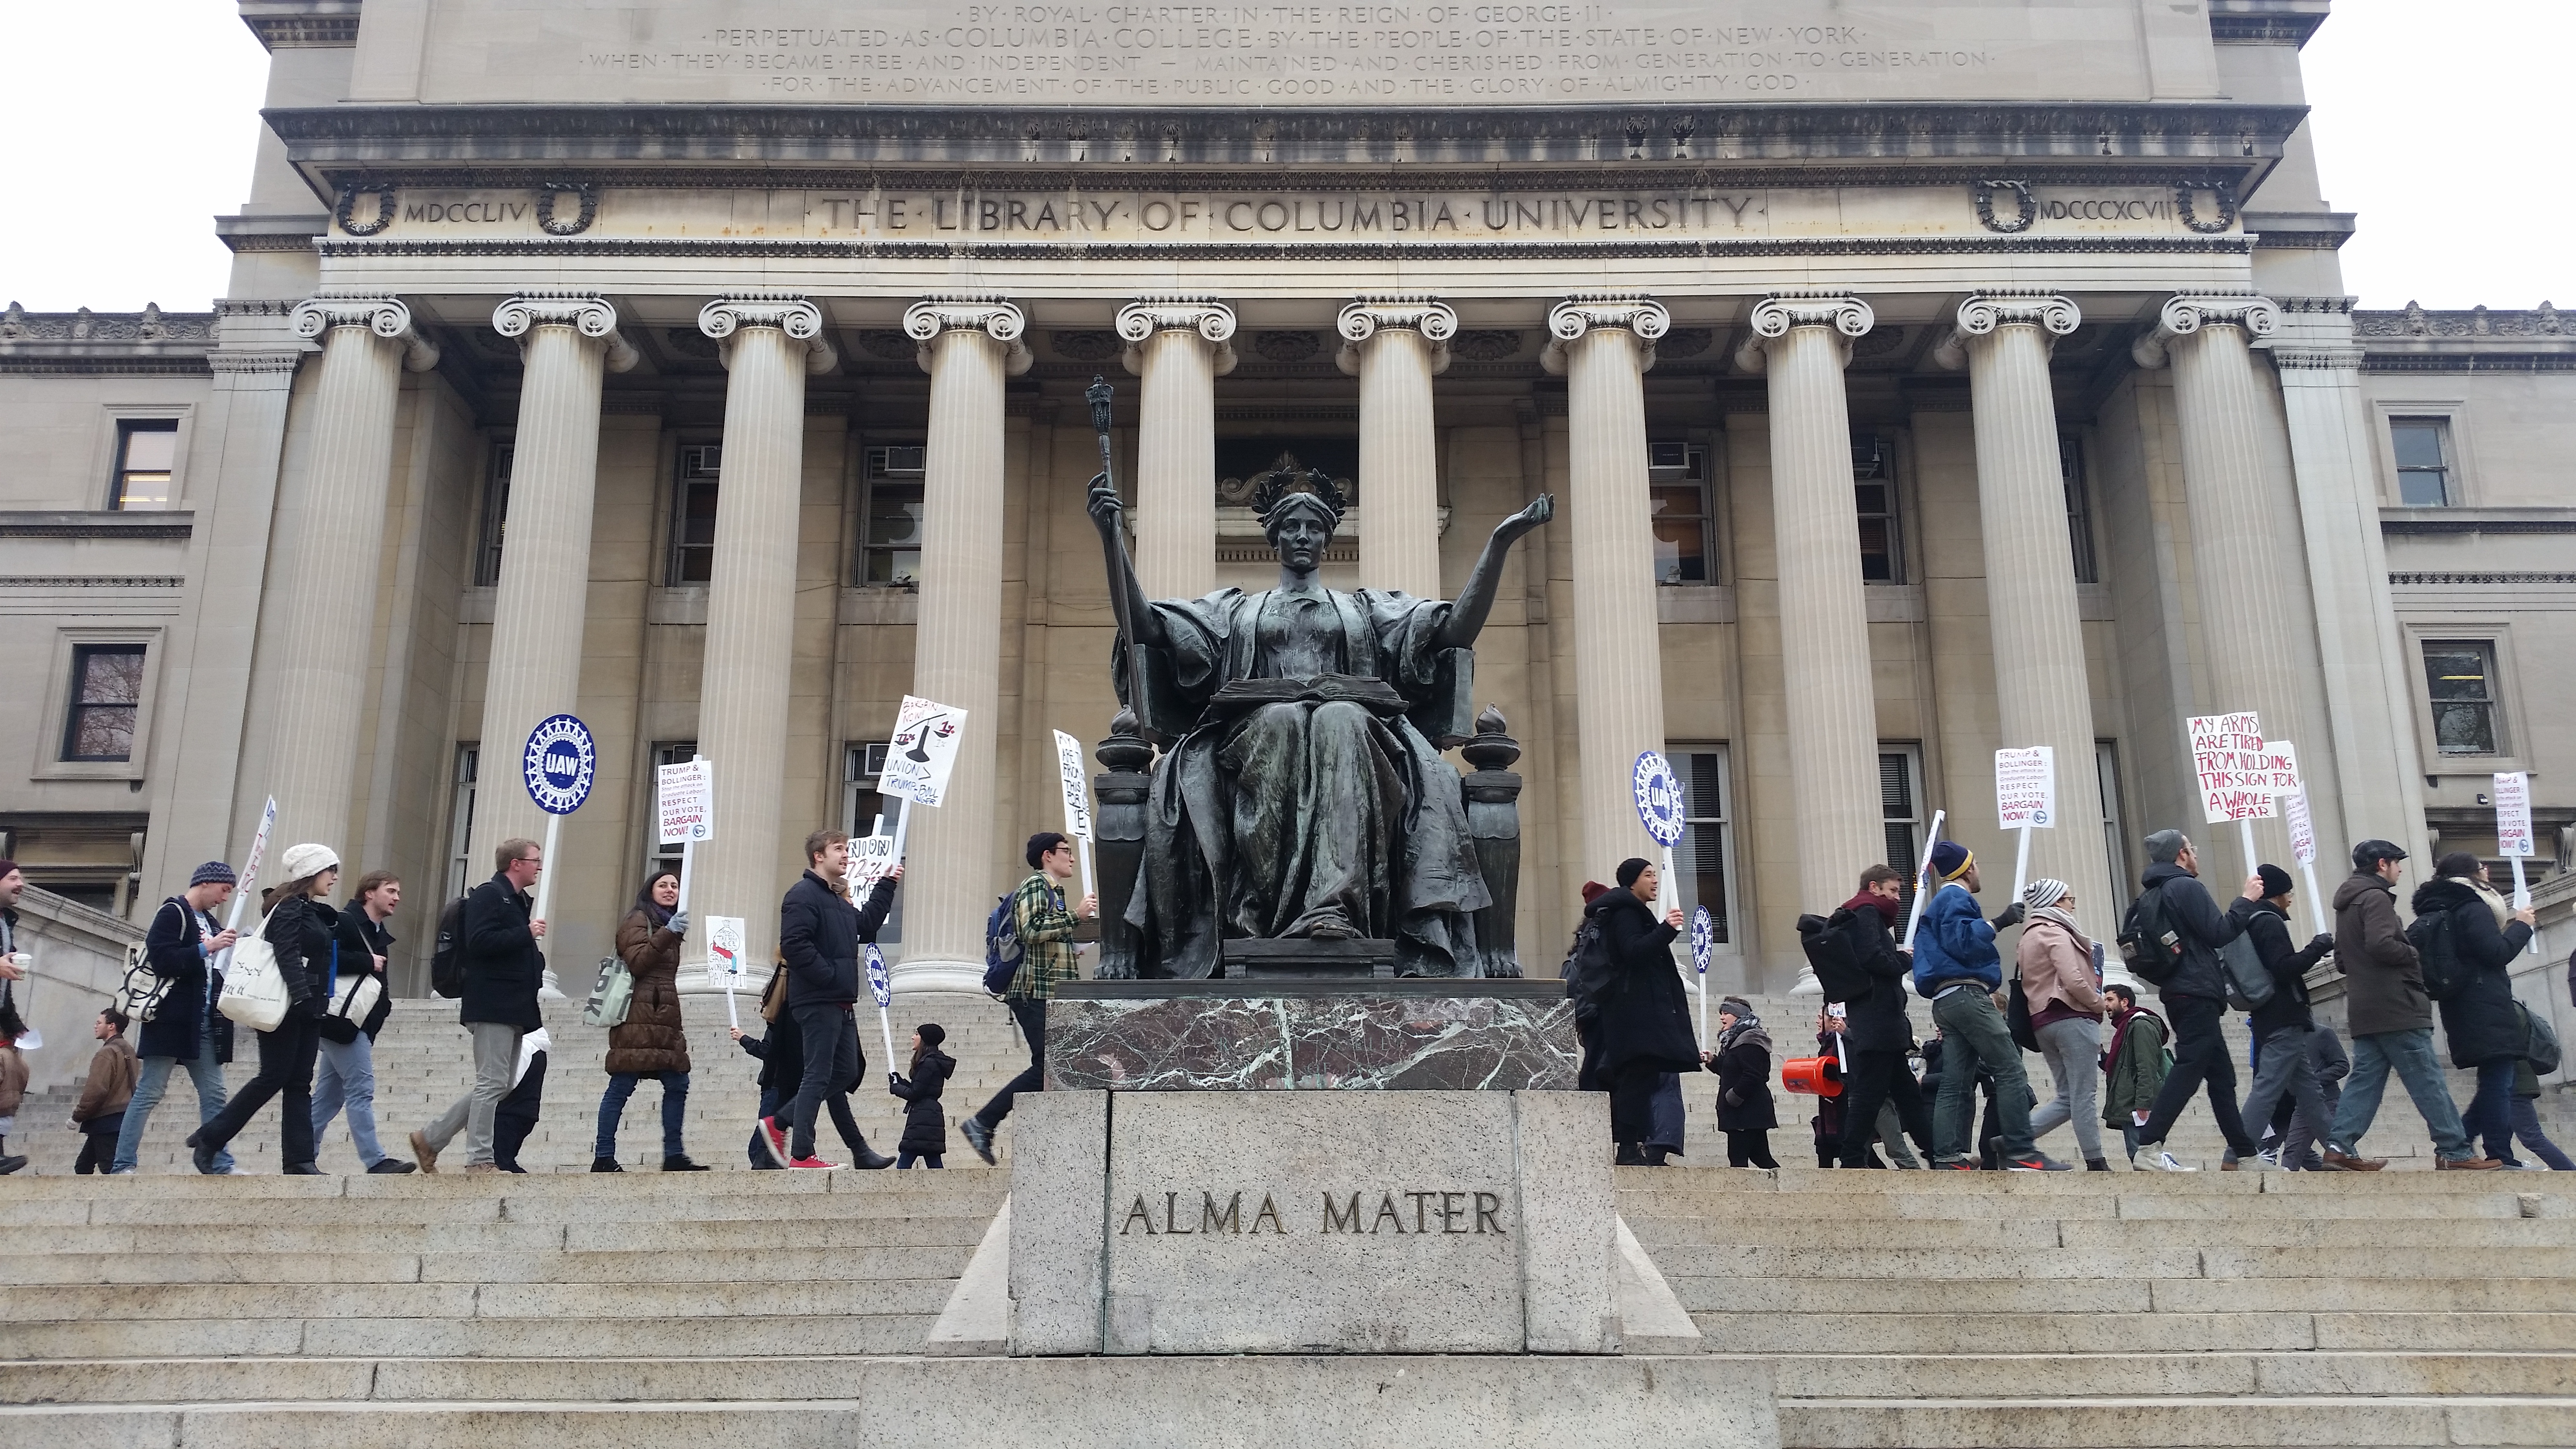 Students at Columbia University picket to demand recognition from the administration, November 2017